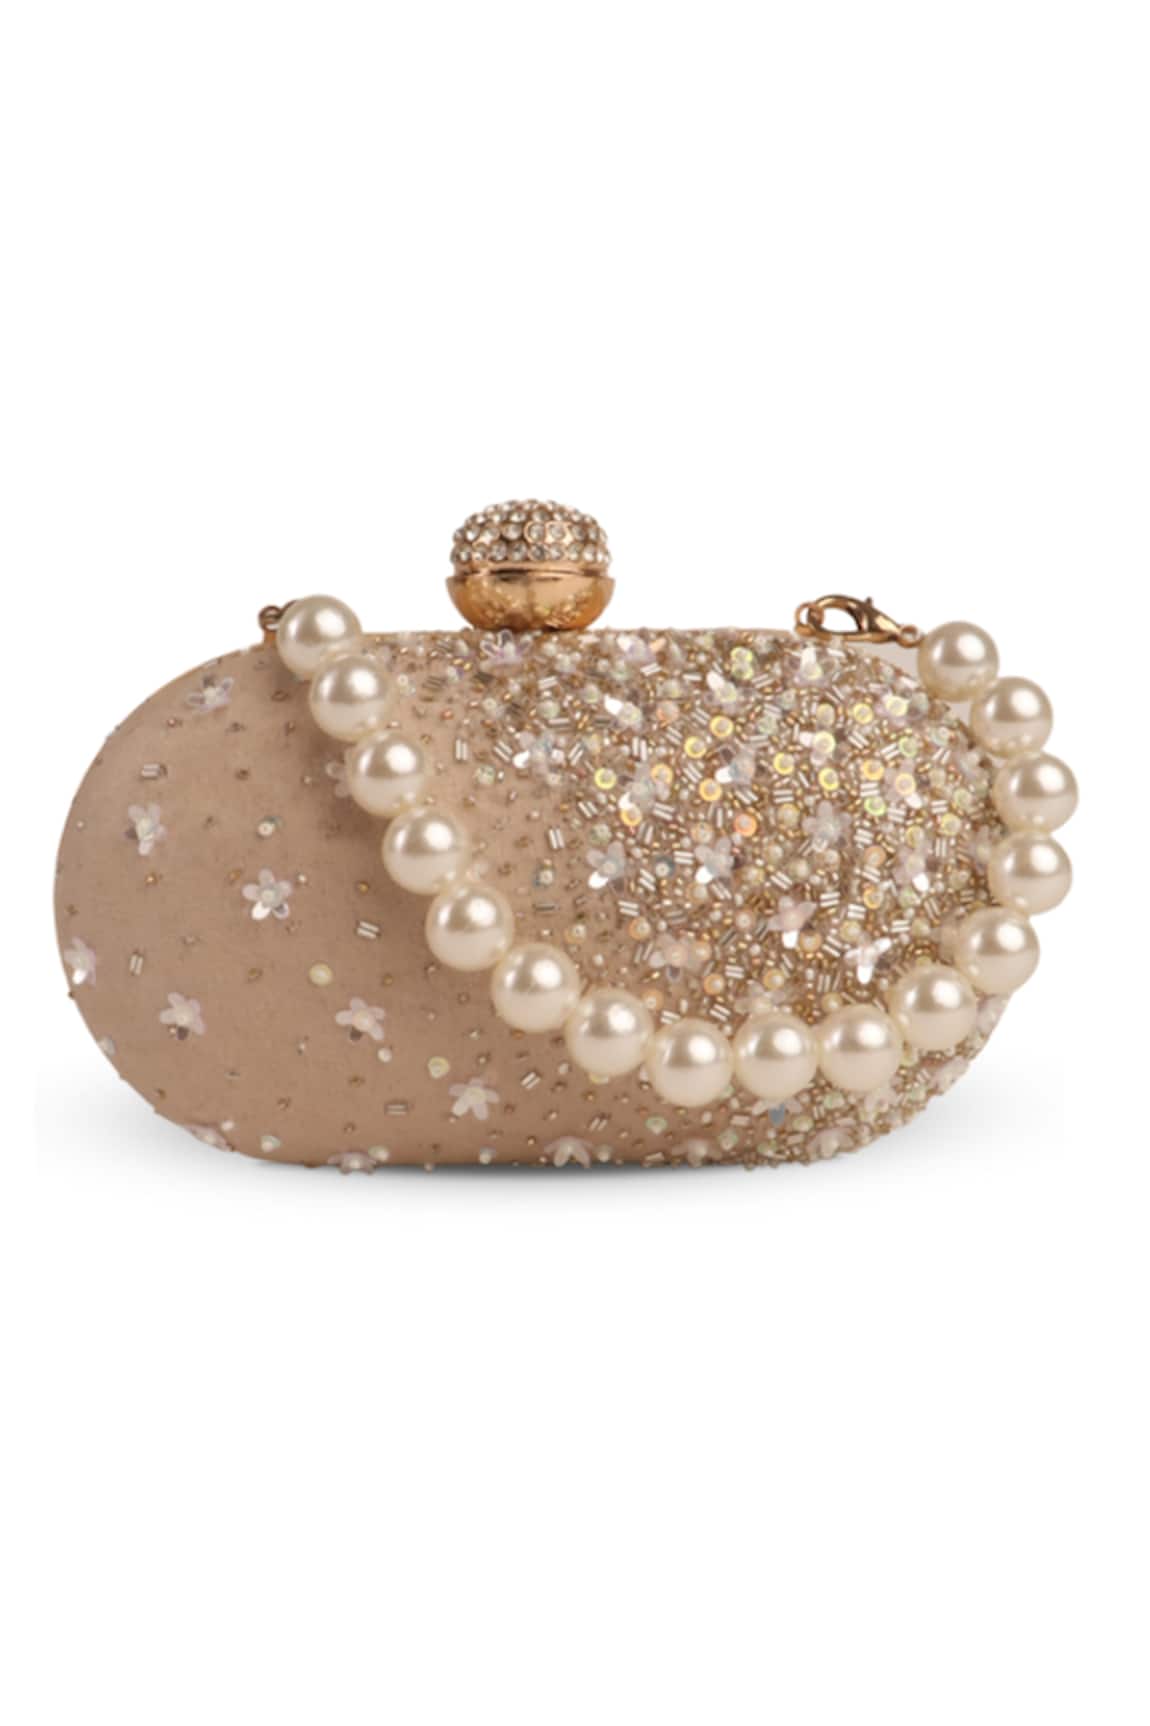 Puro Cosa Flawless Suede Embellished Clutch